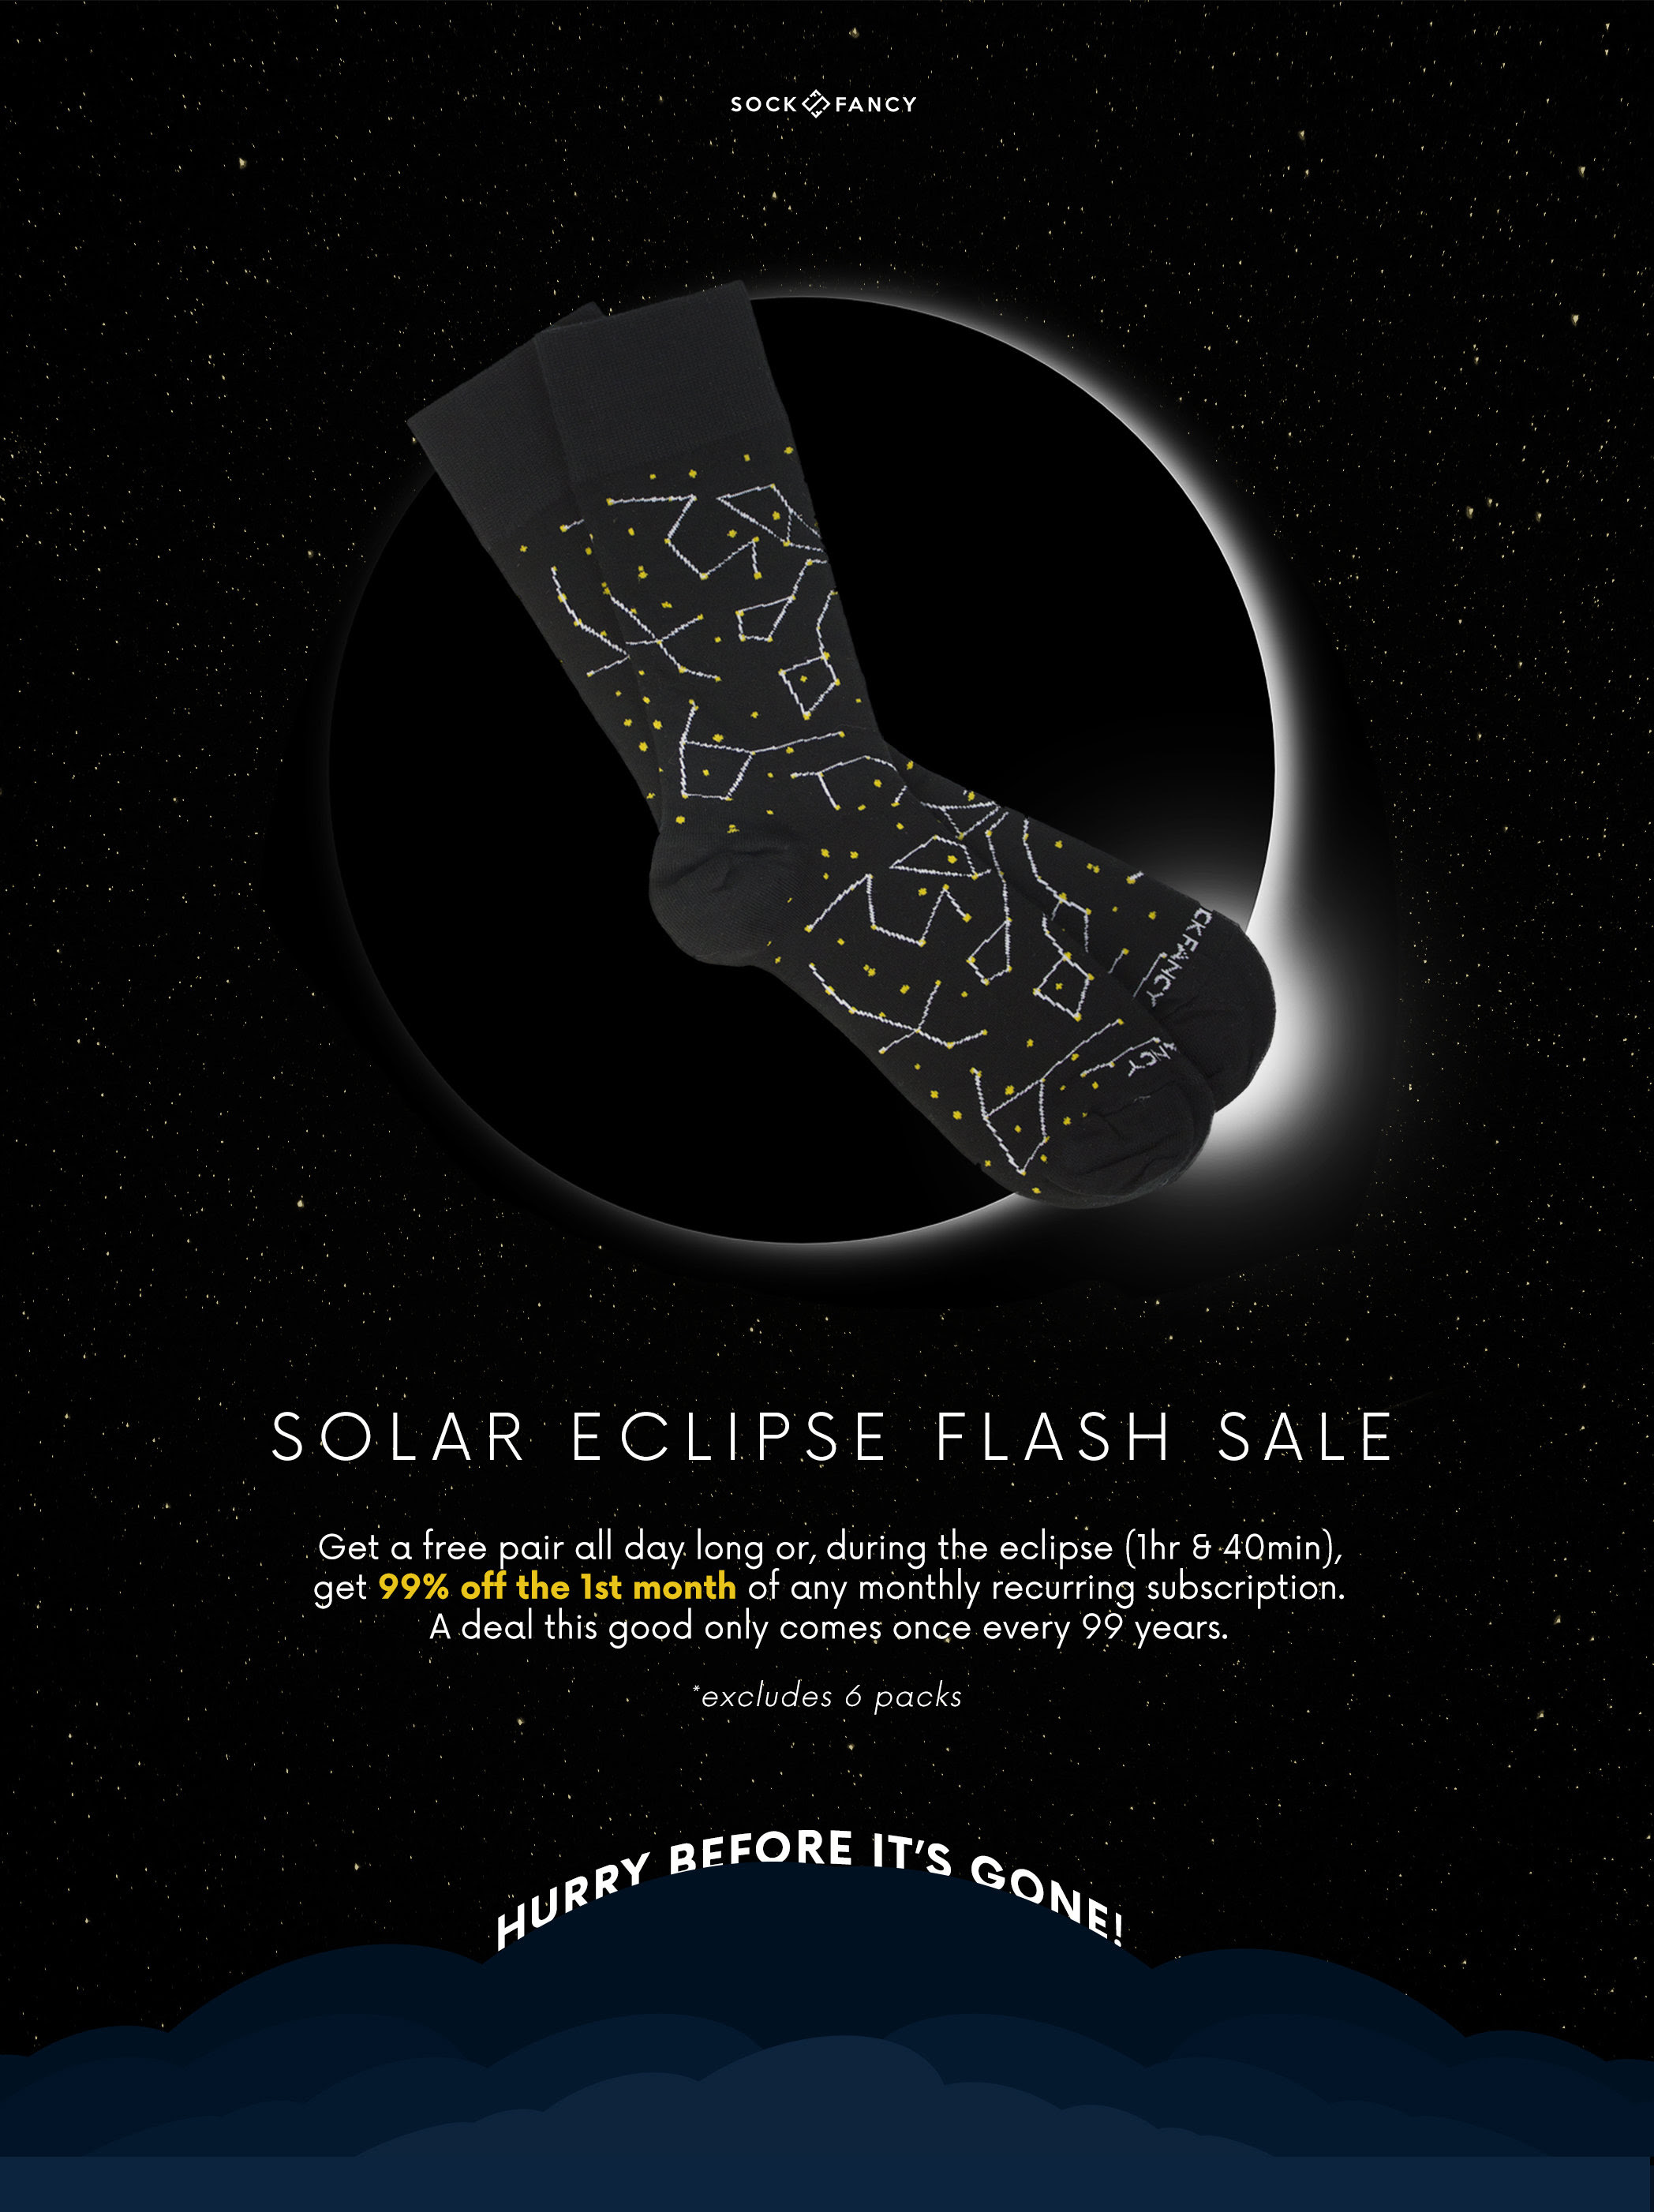 Sock Fancy Eclipse Coupon – Free Pair of Socks with Subscription + 99% Off Your First Month!